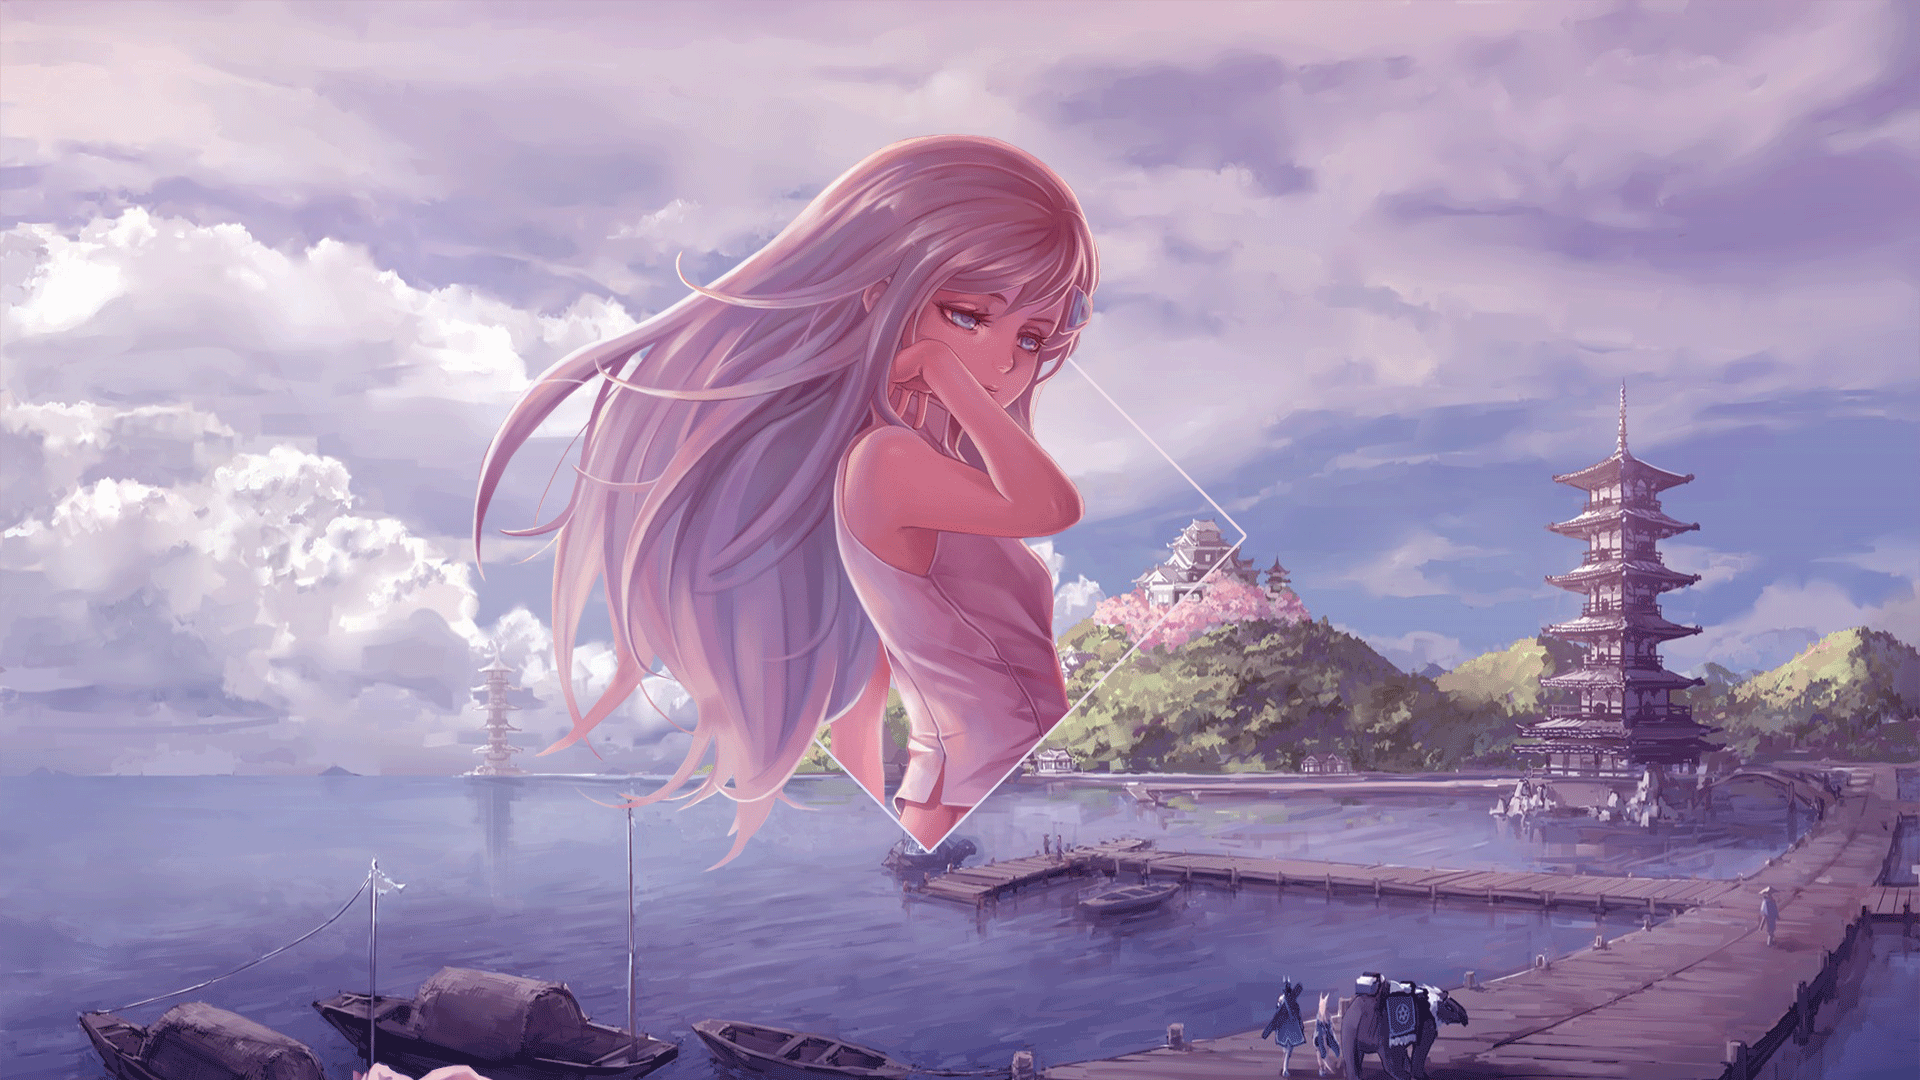 Wallpaper, anime girls, anime landscape, clouds, sea, picture in picture, Photohop, digital art, summer dress 1920x1080